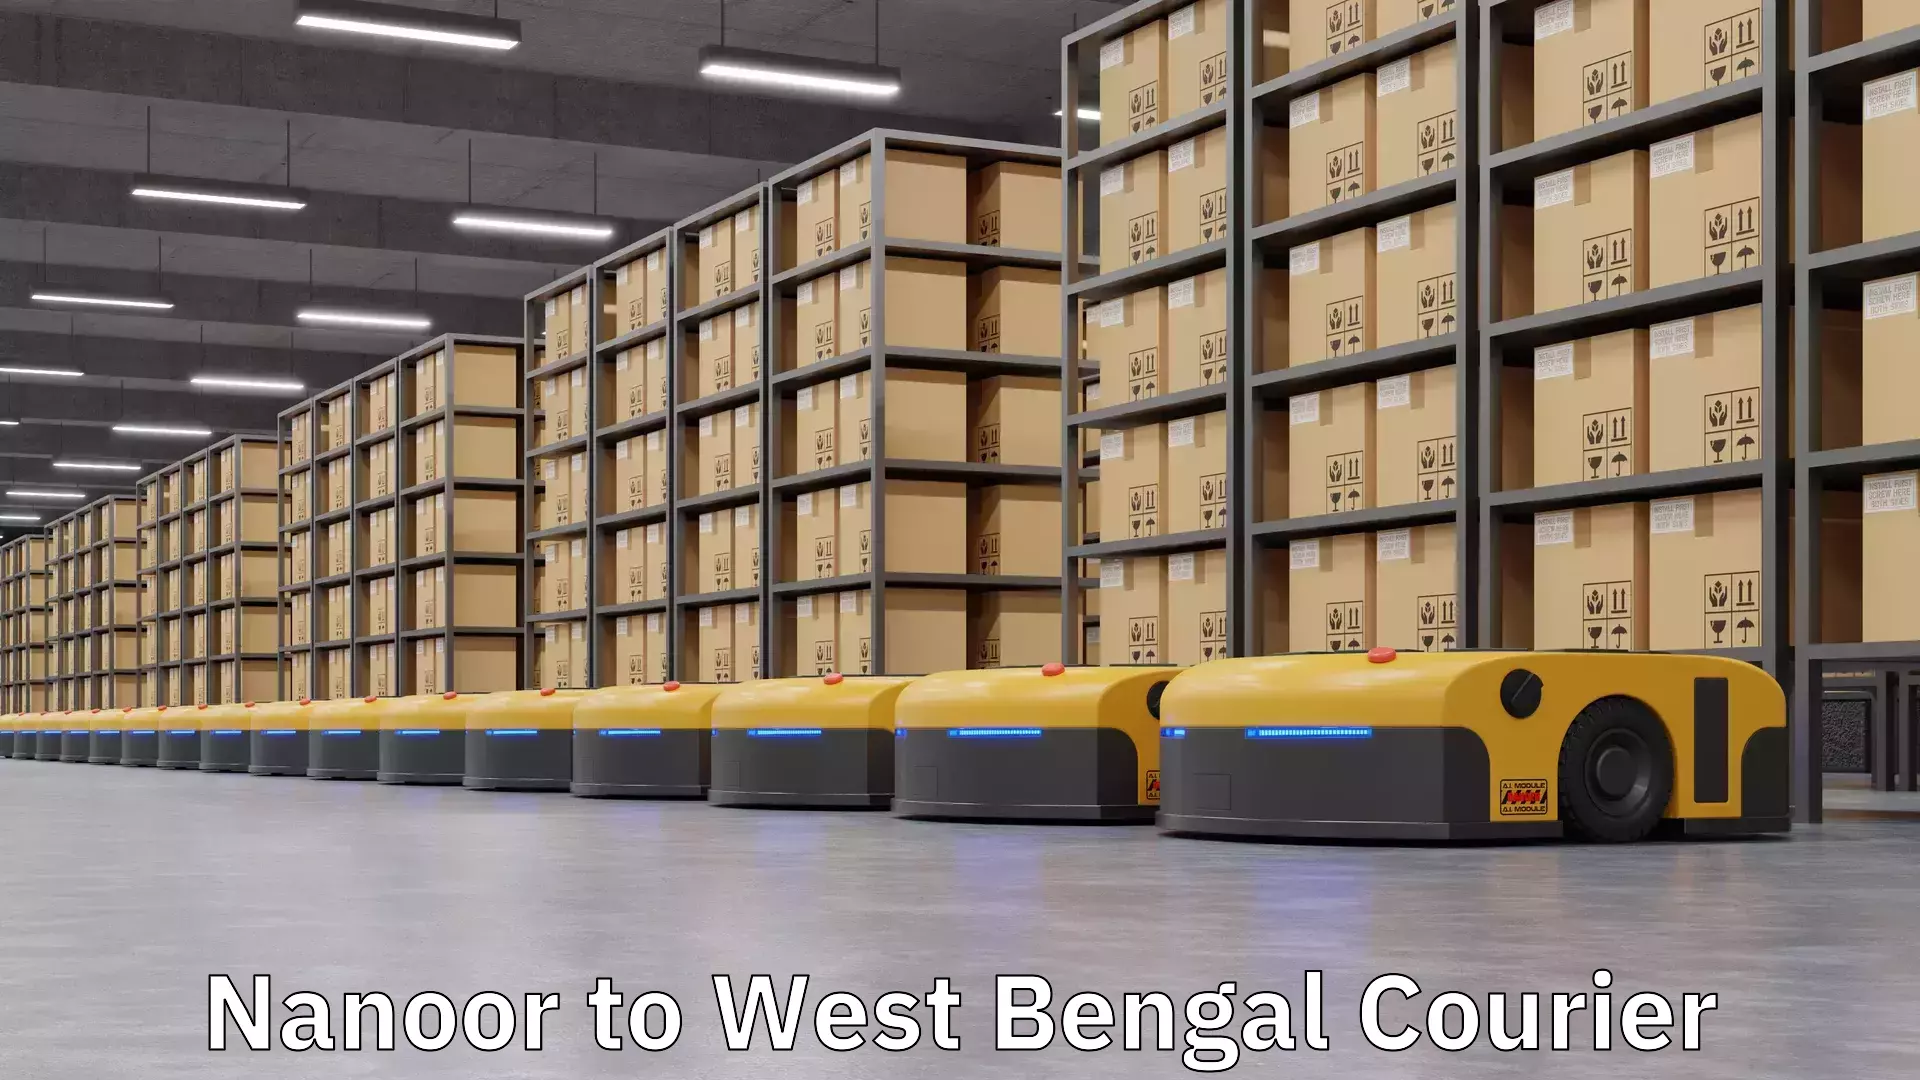 Specialized shipment handling Nanoor to West Bengal